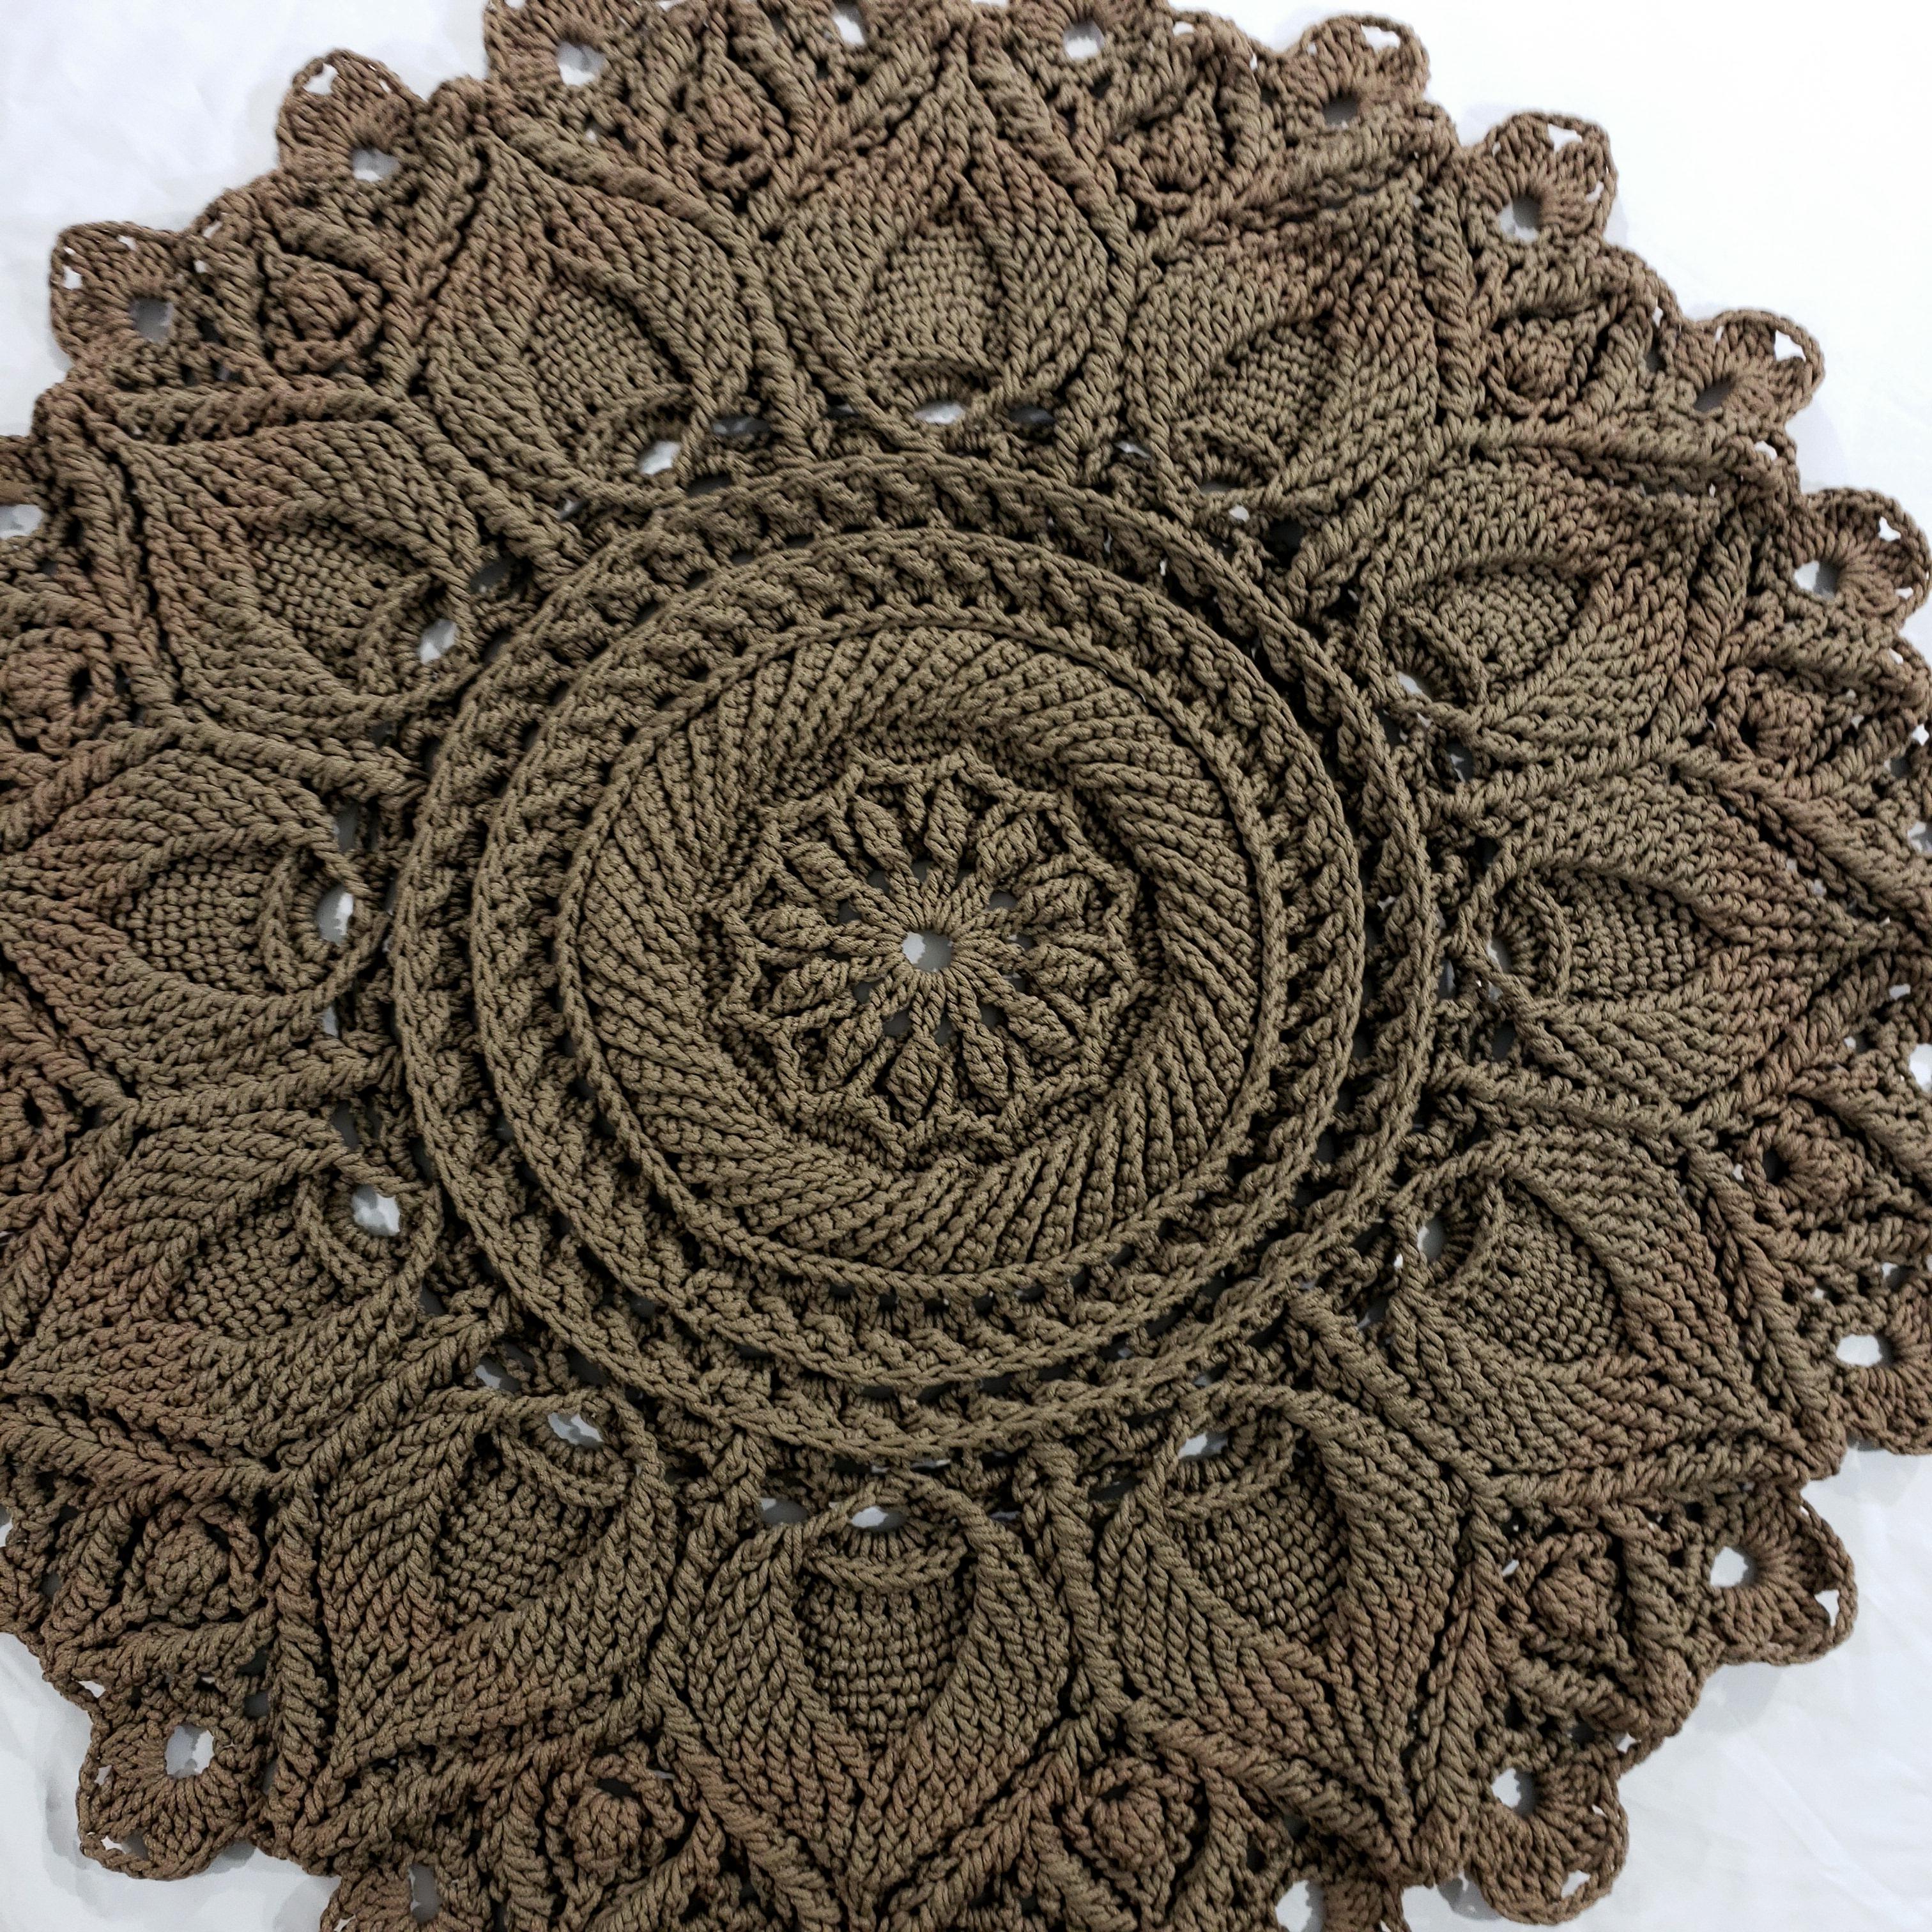 A crochet round mandala rug with layered petals, hand-made with traditional Russian textile techniques. 
A modern decoration with the charm and style of vintage carpets. Add an elegant dimension to any room with this luxurious item!
...

52 inches